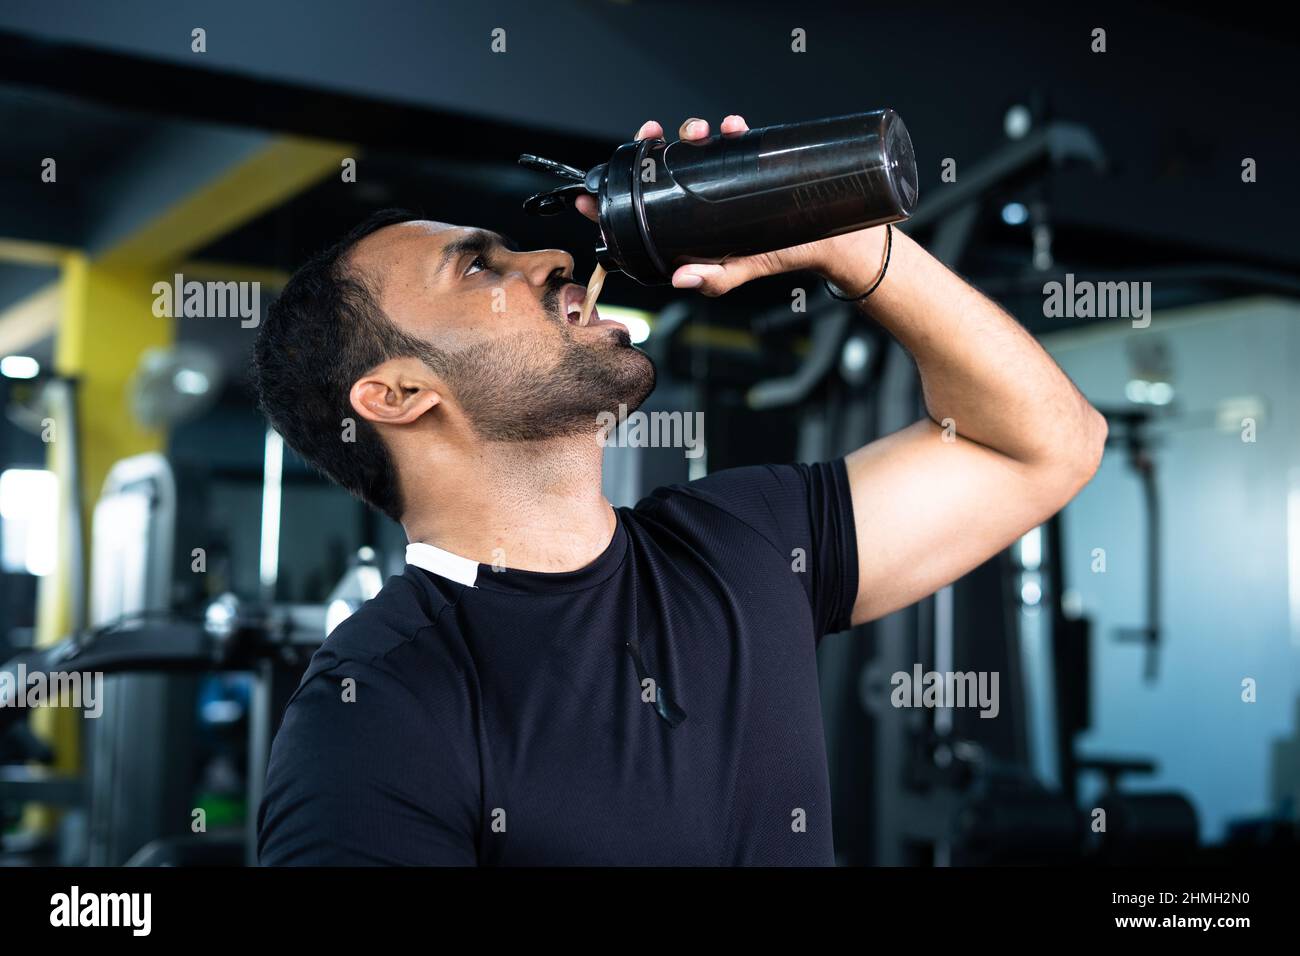 bodybuilder drinking or taking protein powder and mixing with water on bottle by shaking at gym - concpet of muscular gain, fitness training and Stock Photo